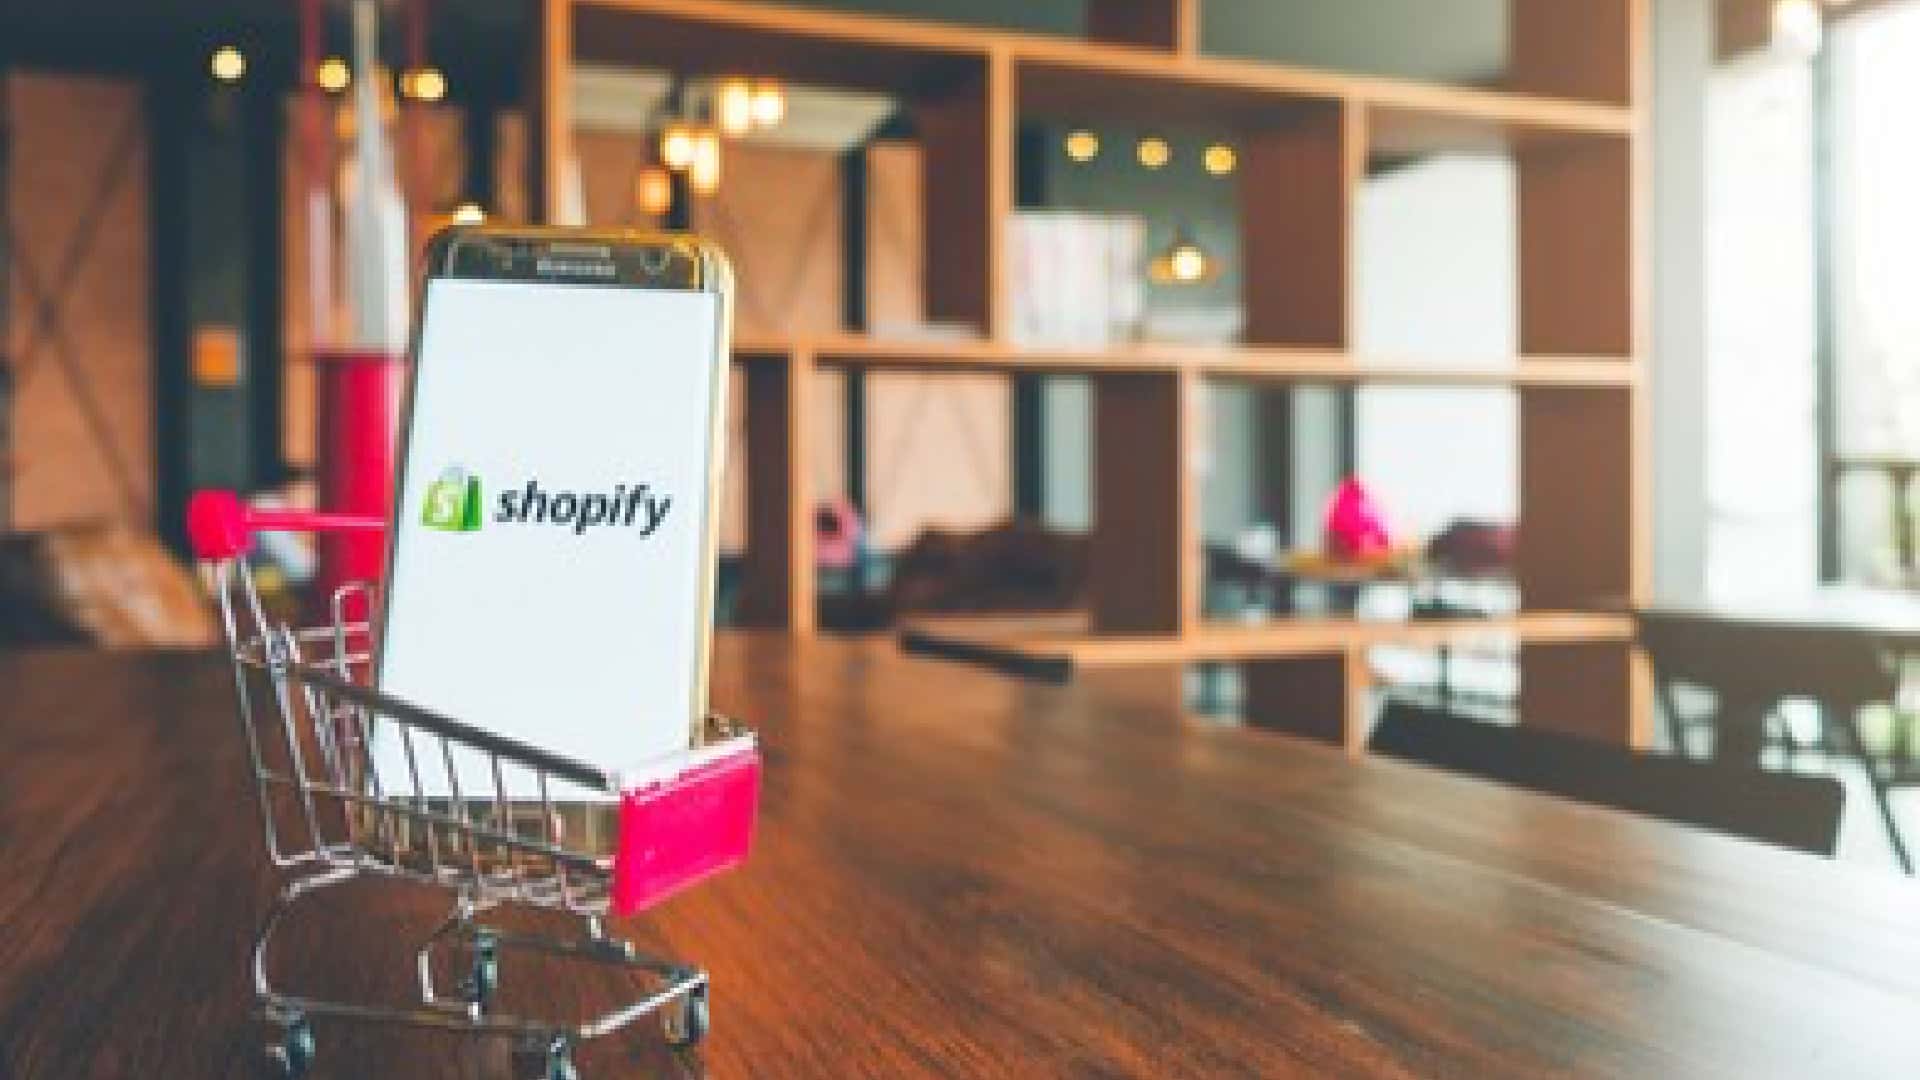 Shopify is testing a new universal search feature